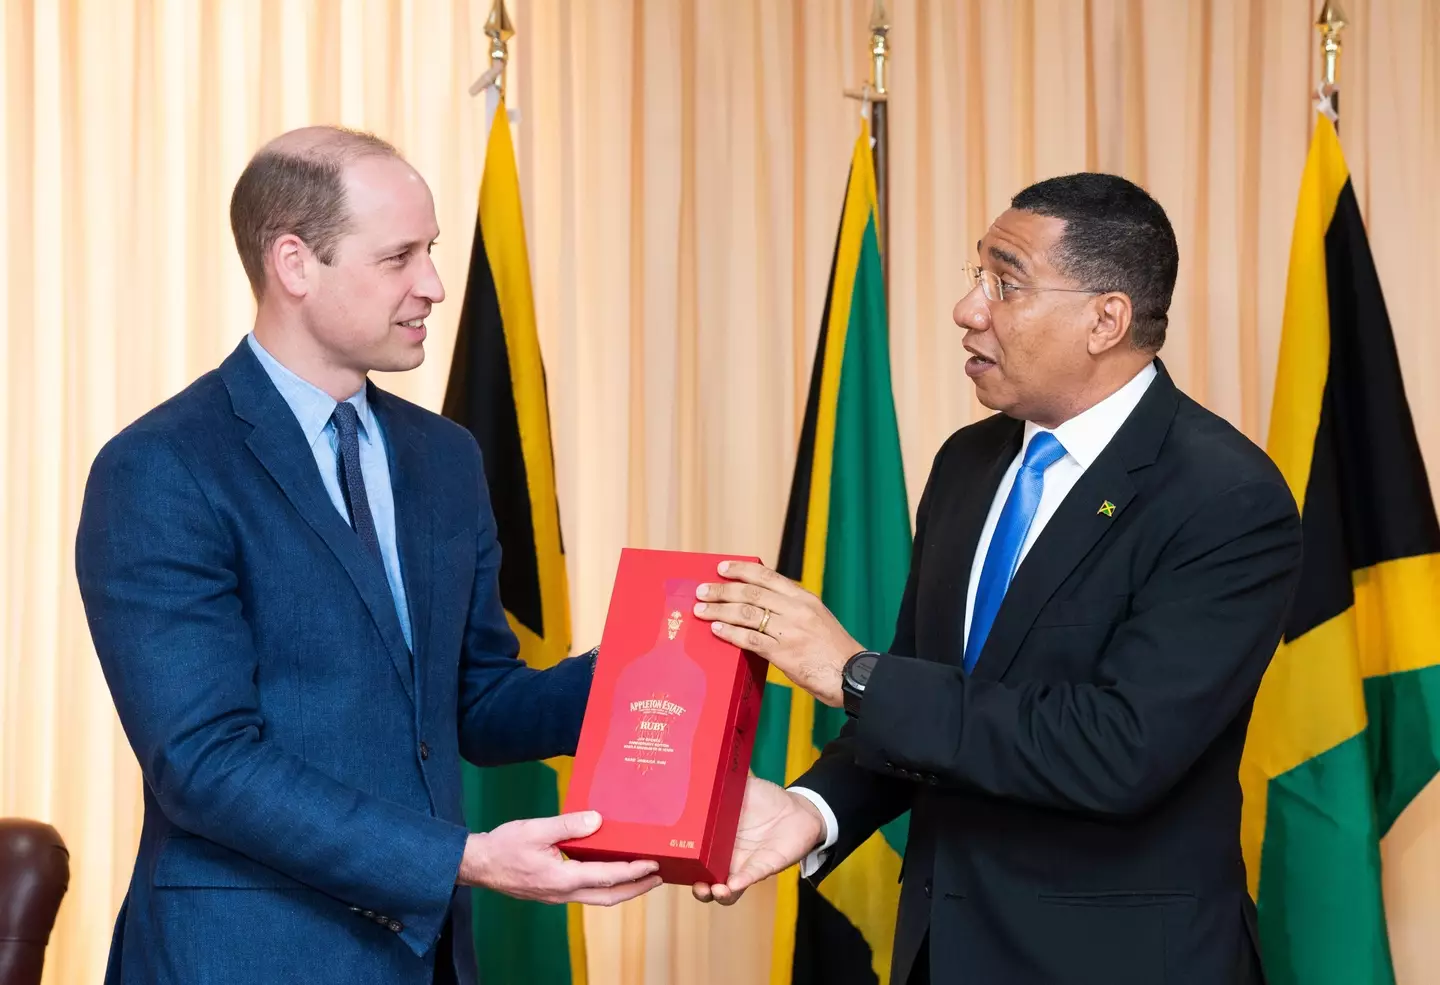 Prince William was gifted a bottle of rum during his meeting with Prime Minister Holness.